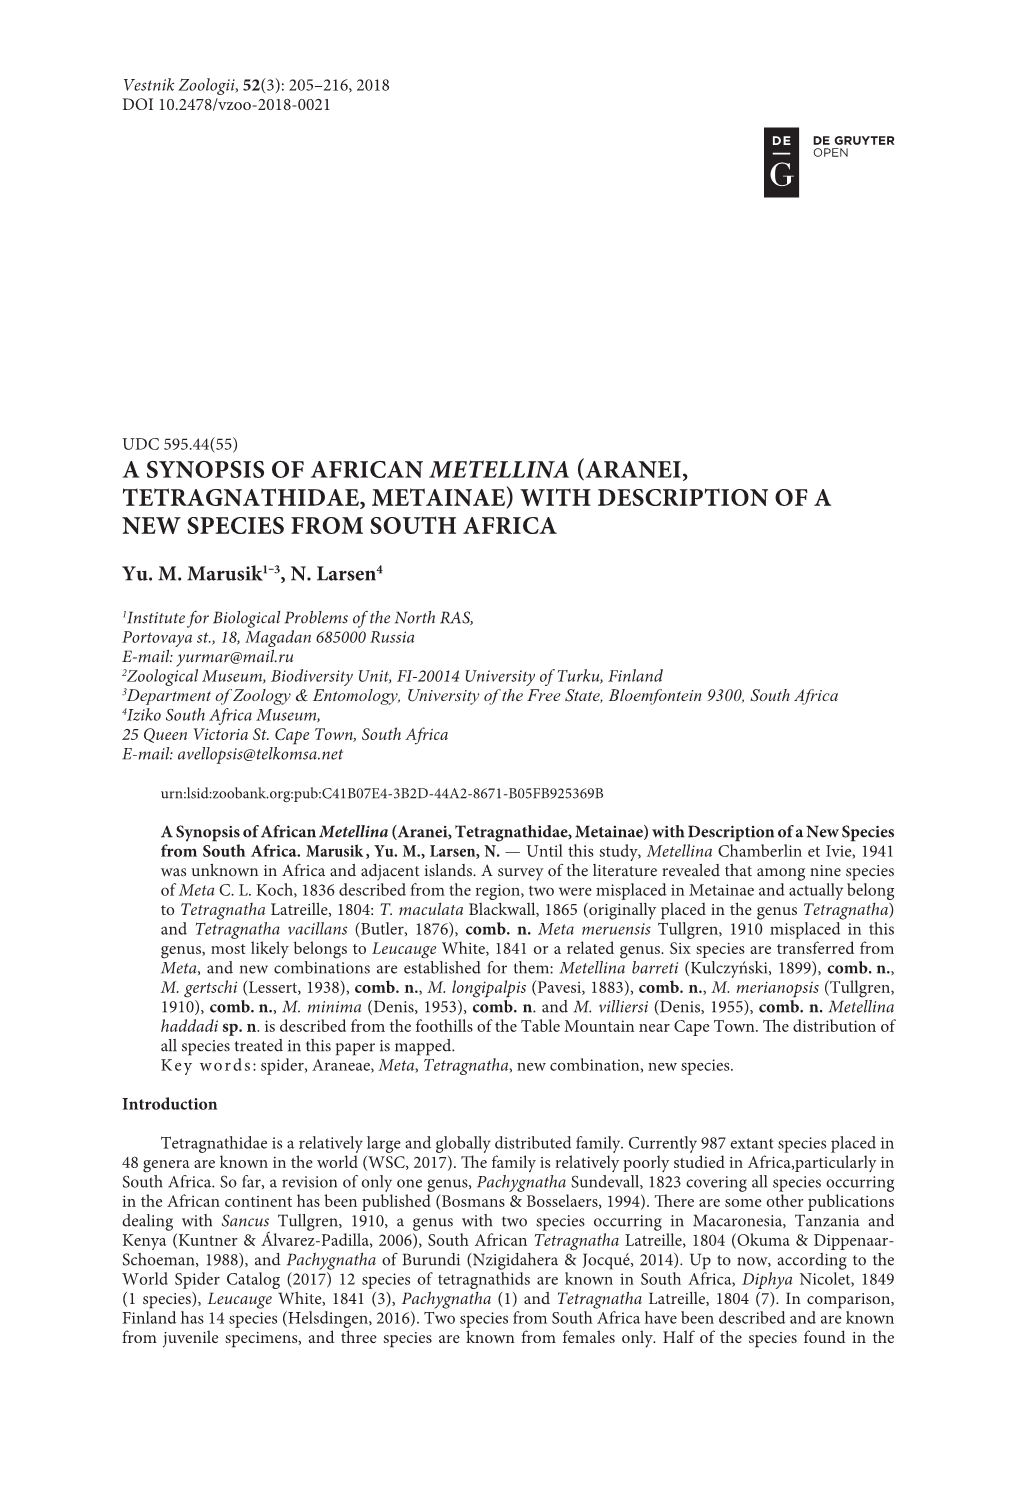 A Synopsis of African Metellina (Aranei, Tetragnathidae, Metainae) with Description of a New Species from South Africa